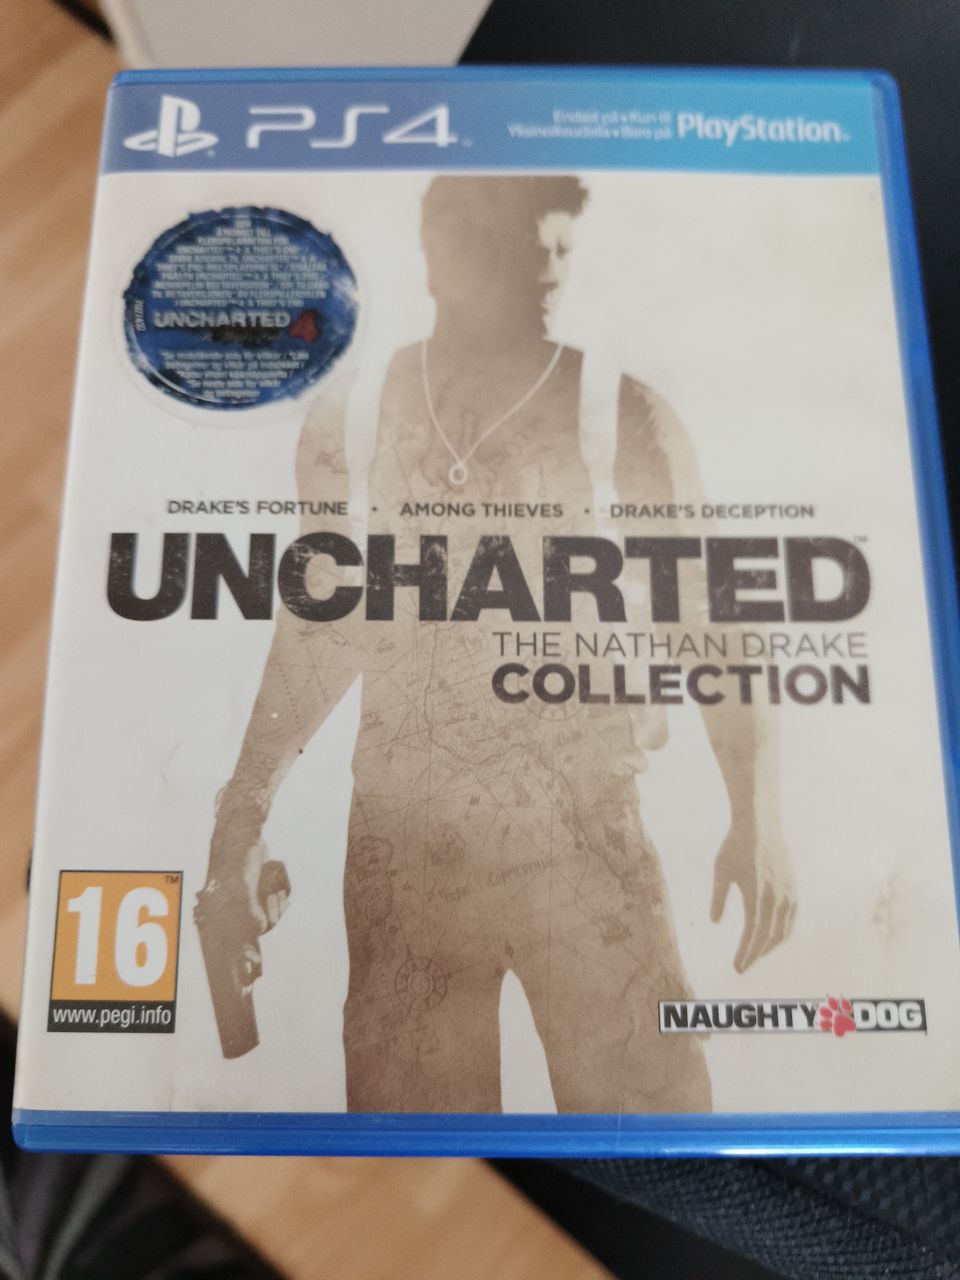 UNCHARTED - THE NATHAN DRAKE COLLECTION